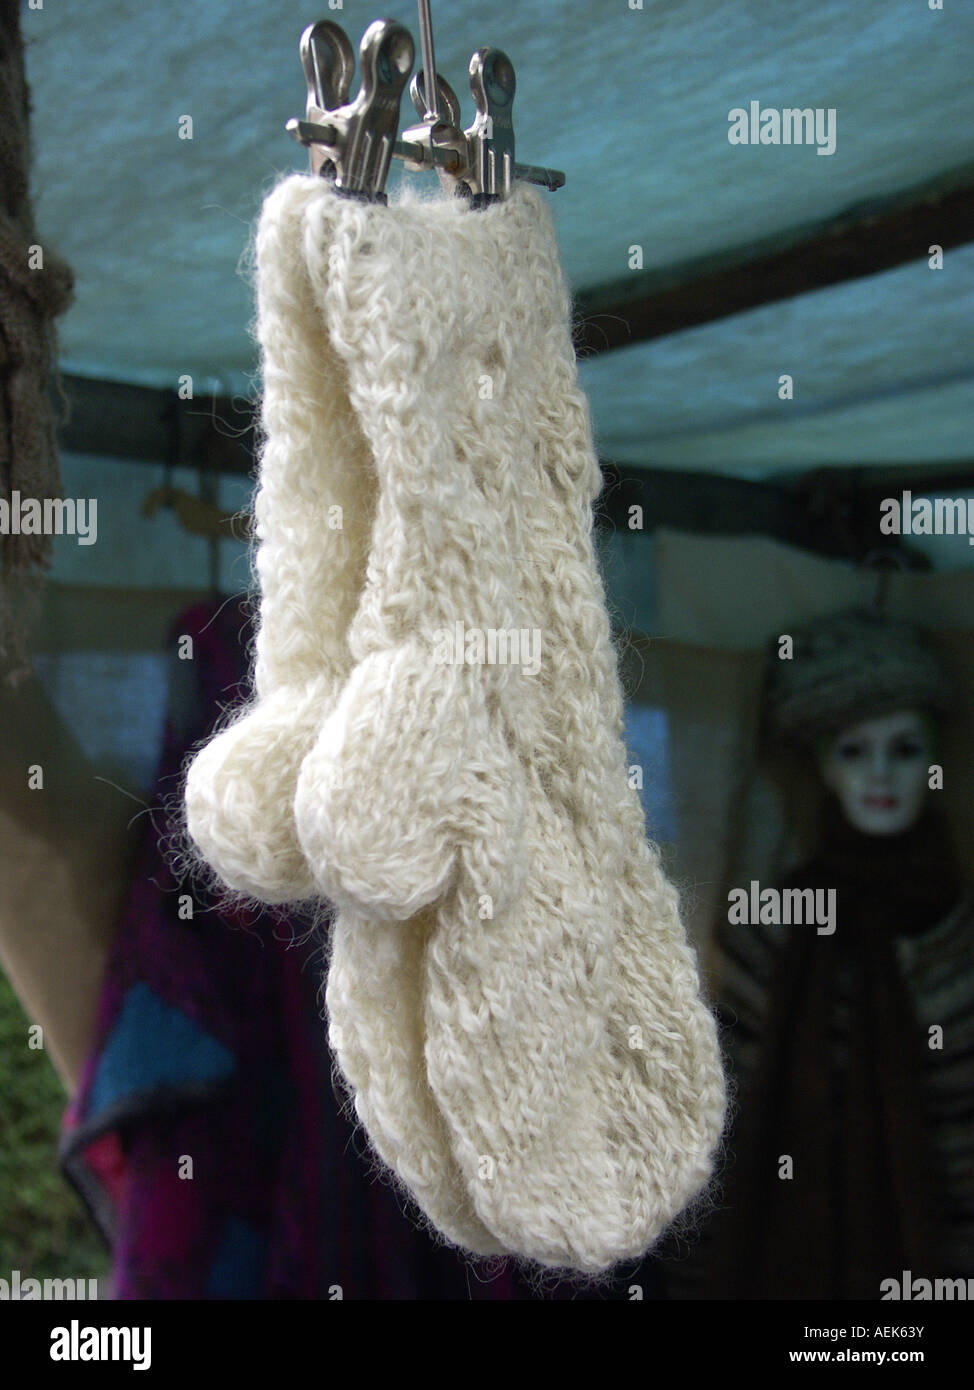 Sheep's wool sock at a sales stand Stock Photo